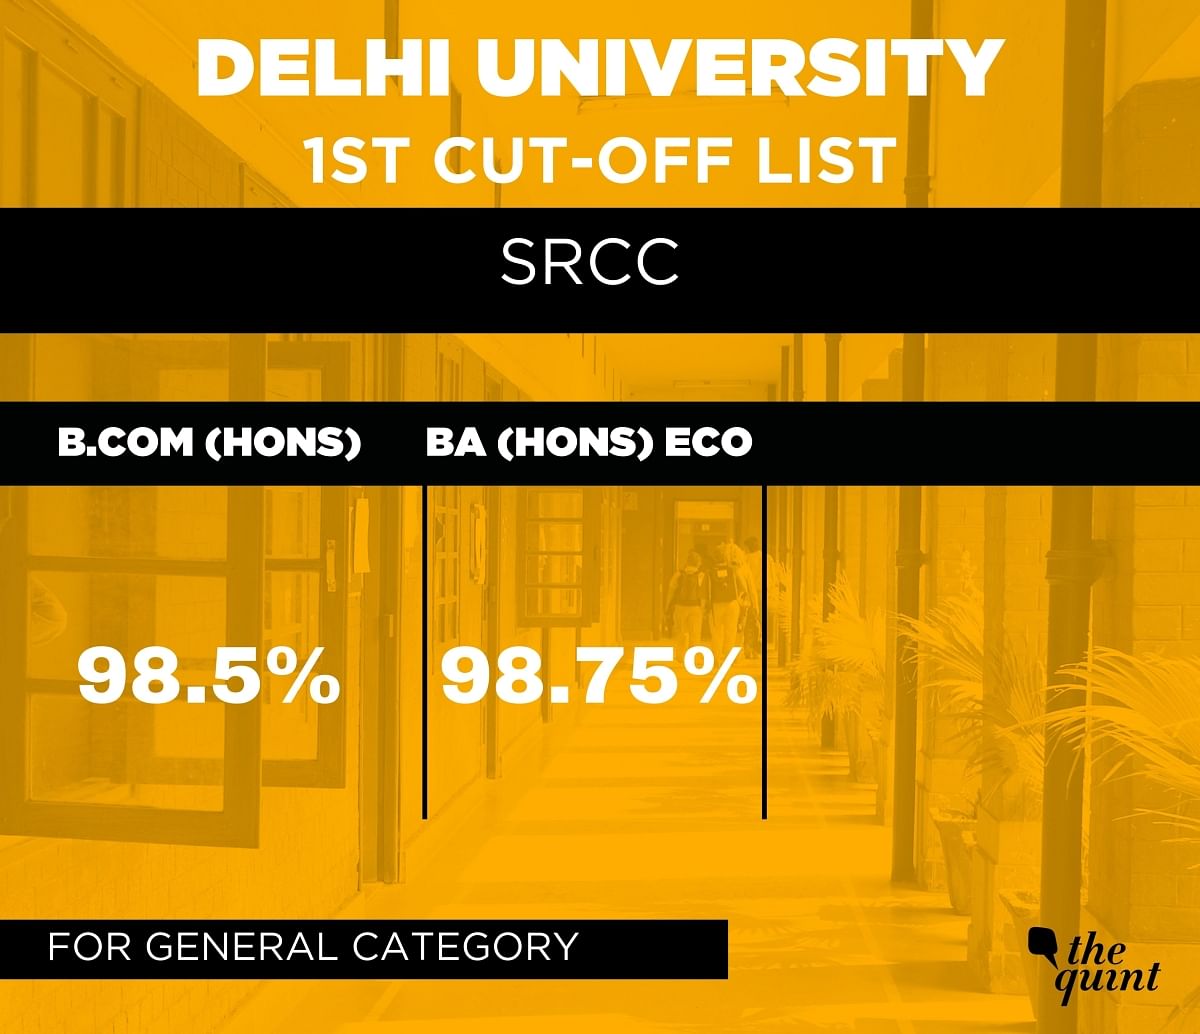 A total of 2,58,388 paid applications were received at DU this year, a drop of around 20,000 from last year.